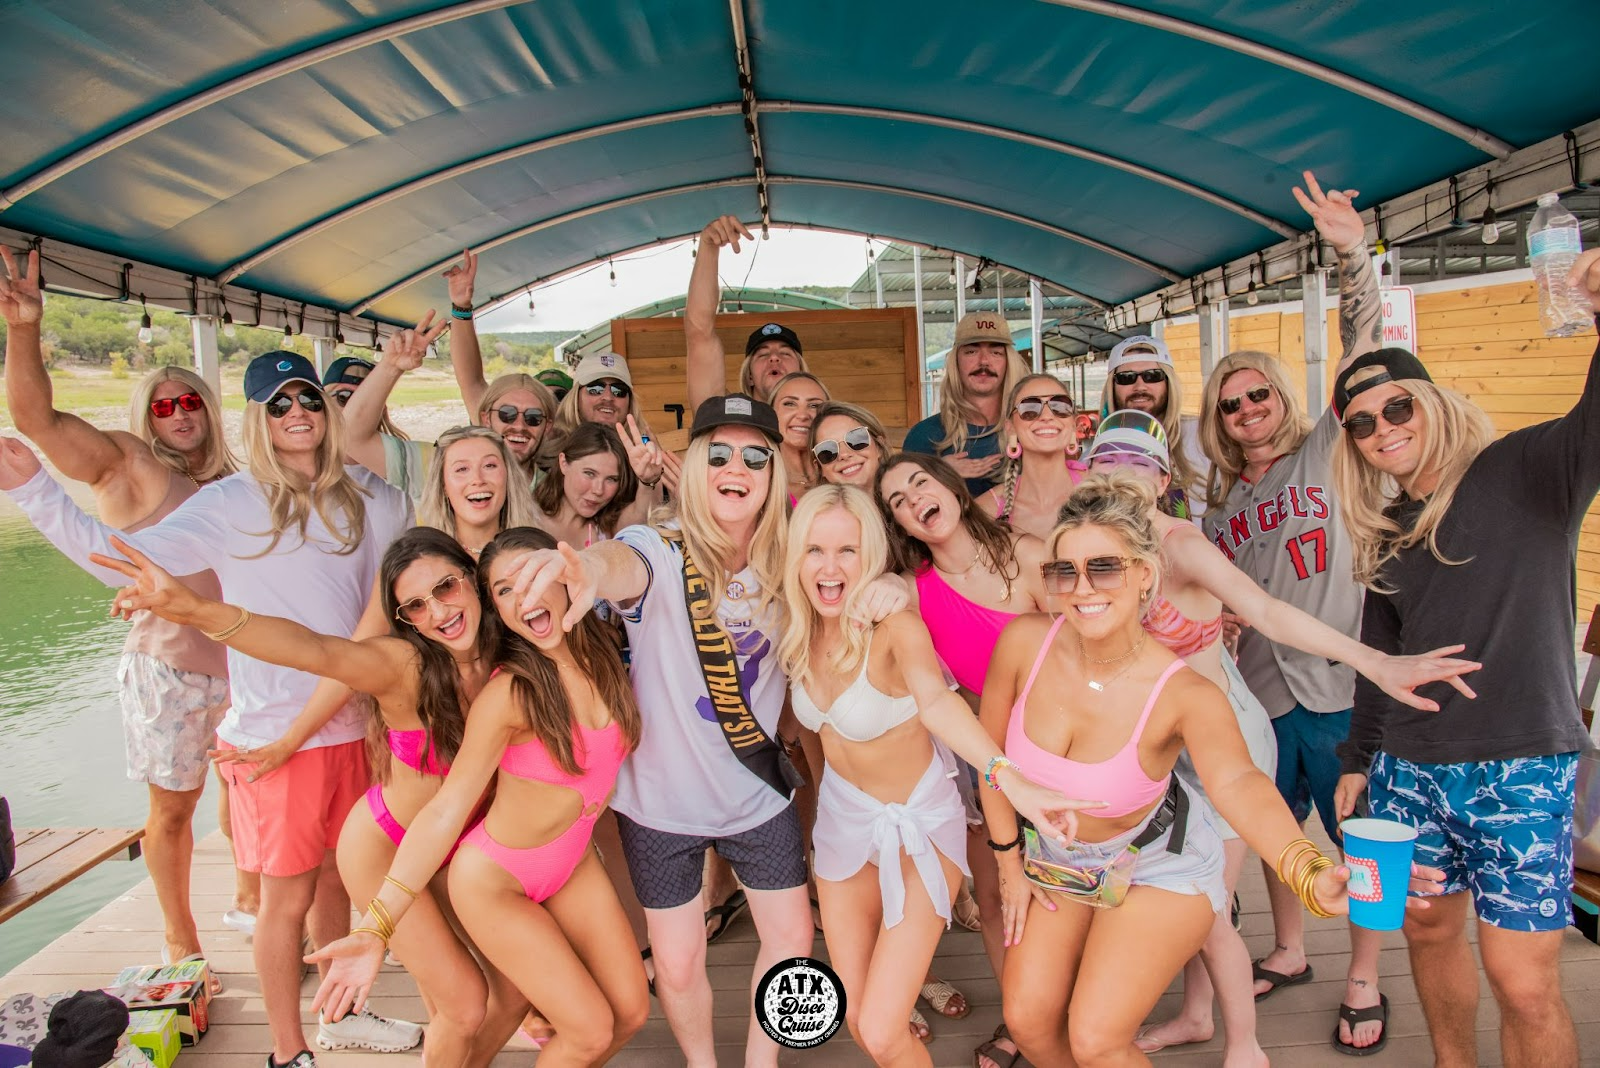 Experience unforgettable memories with friends on Premier Party Cruises' Bachelorette Party in Austin